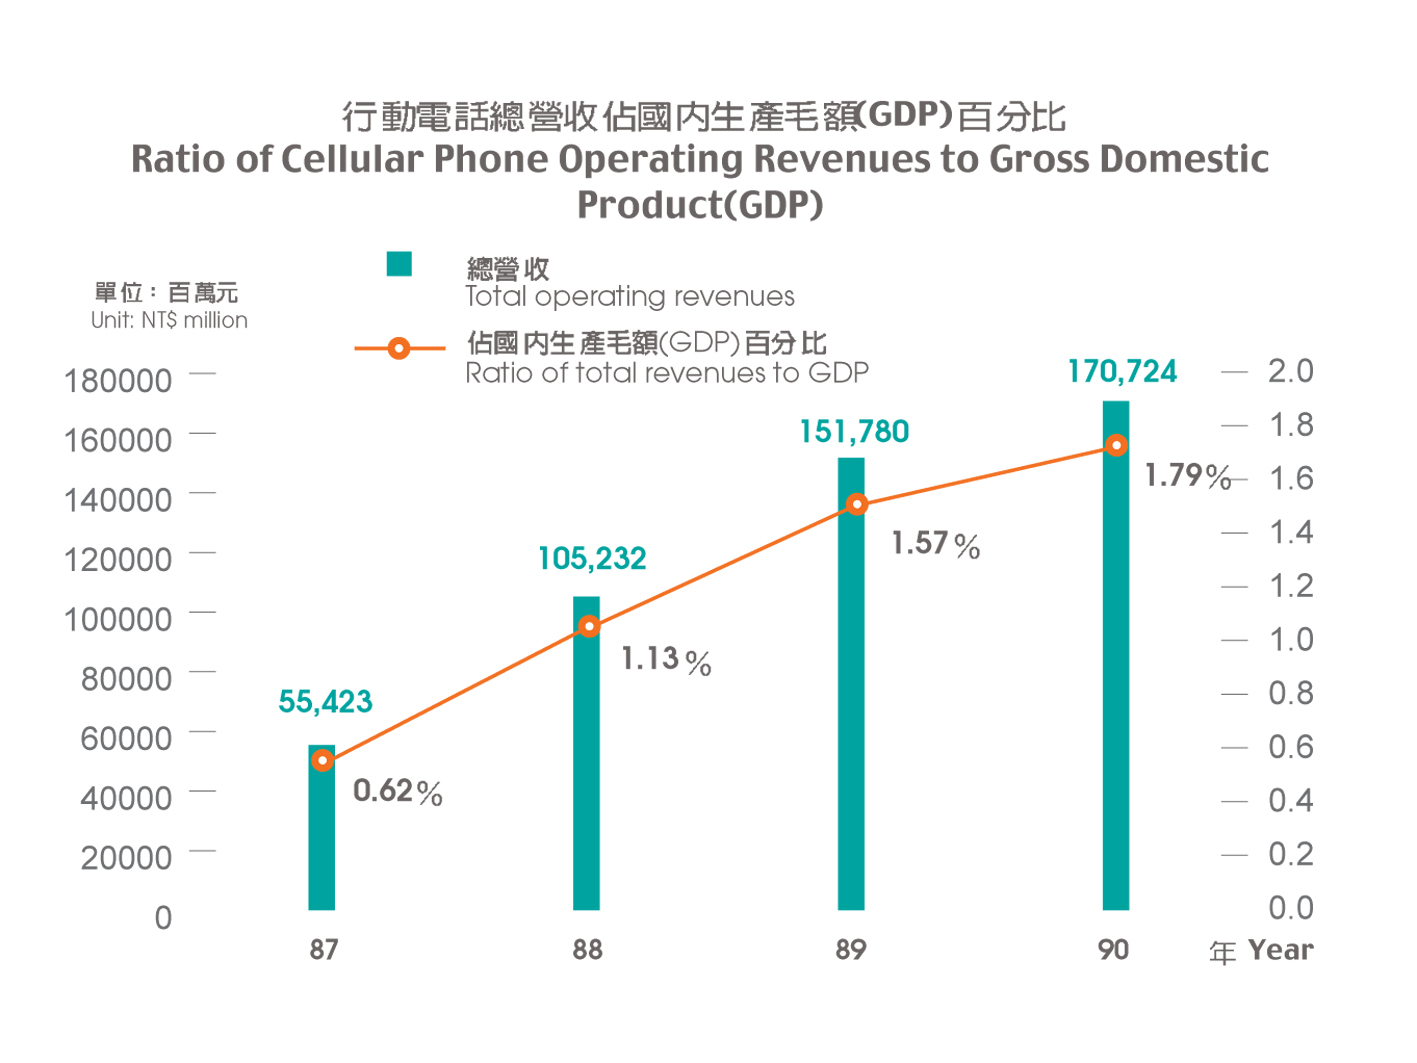 Ratio of Cellular Phone Operating Revenues to Gross Domestic Product (GDP)